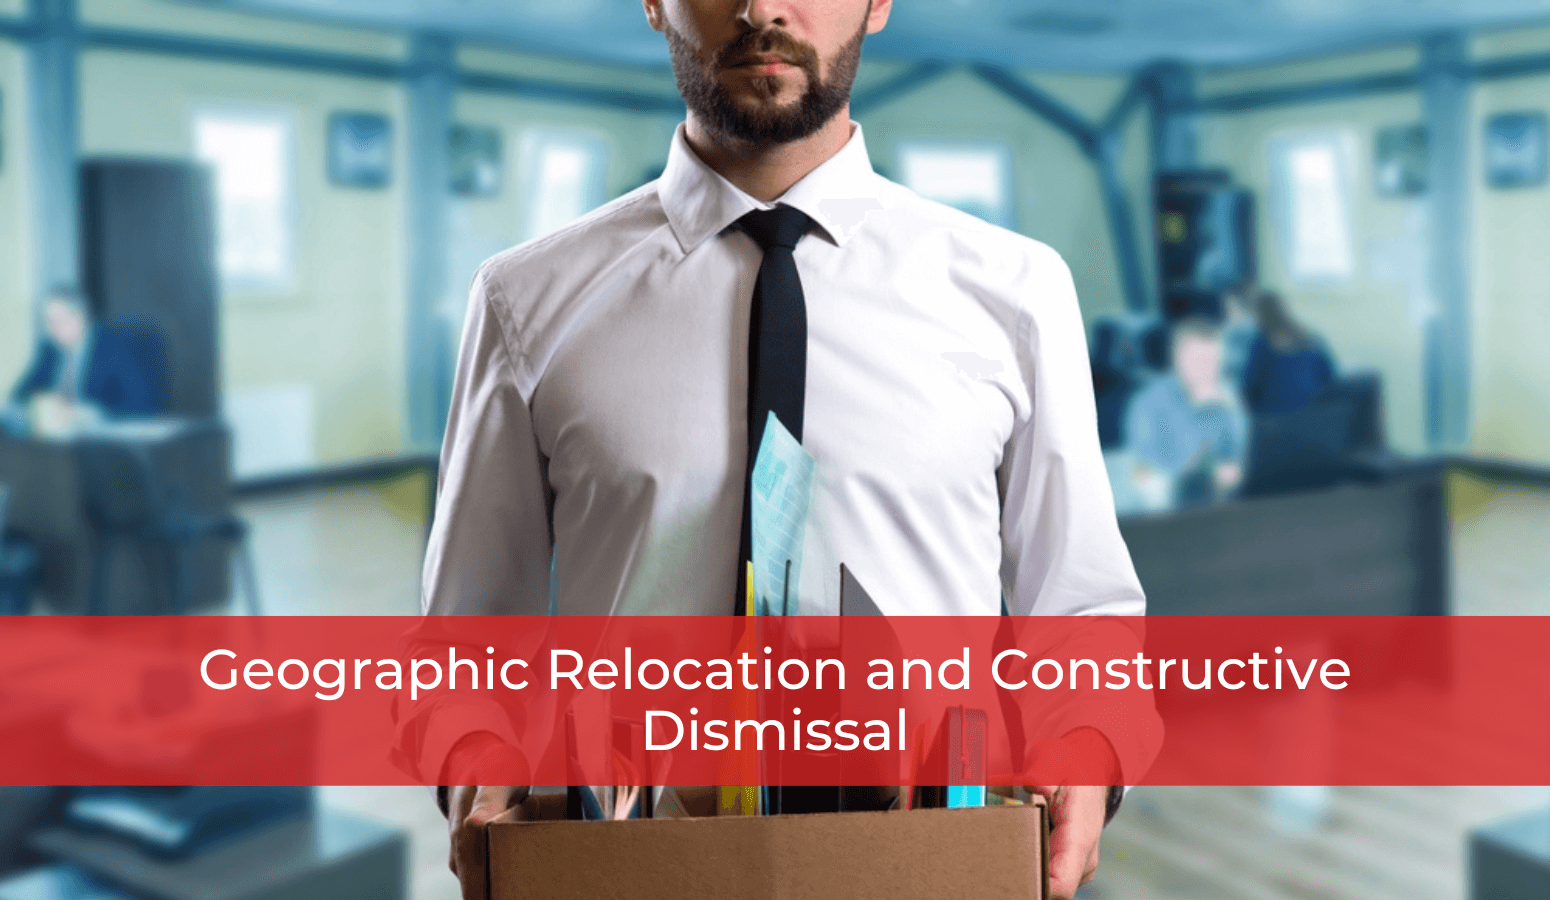 Featured image for “Geographic Relocation and Constructive Dismissal”